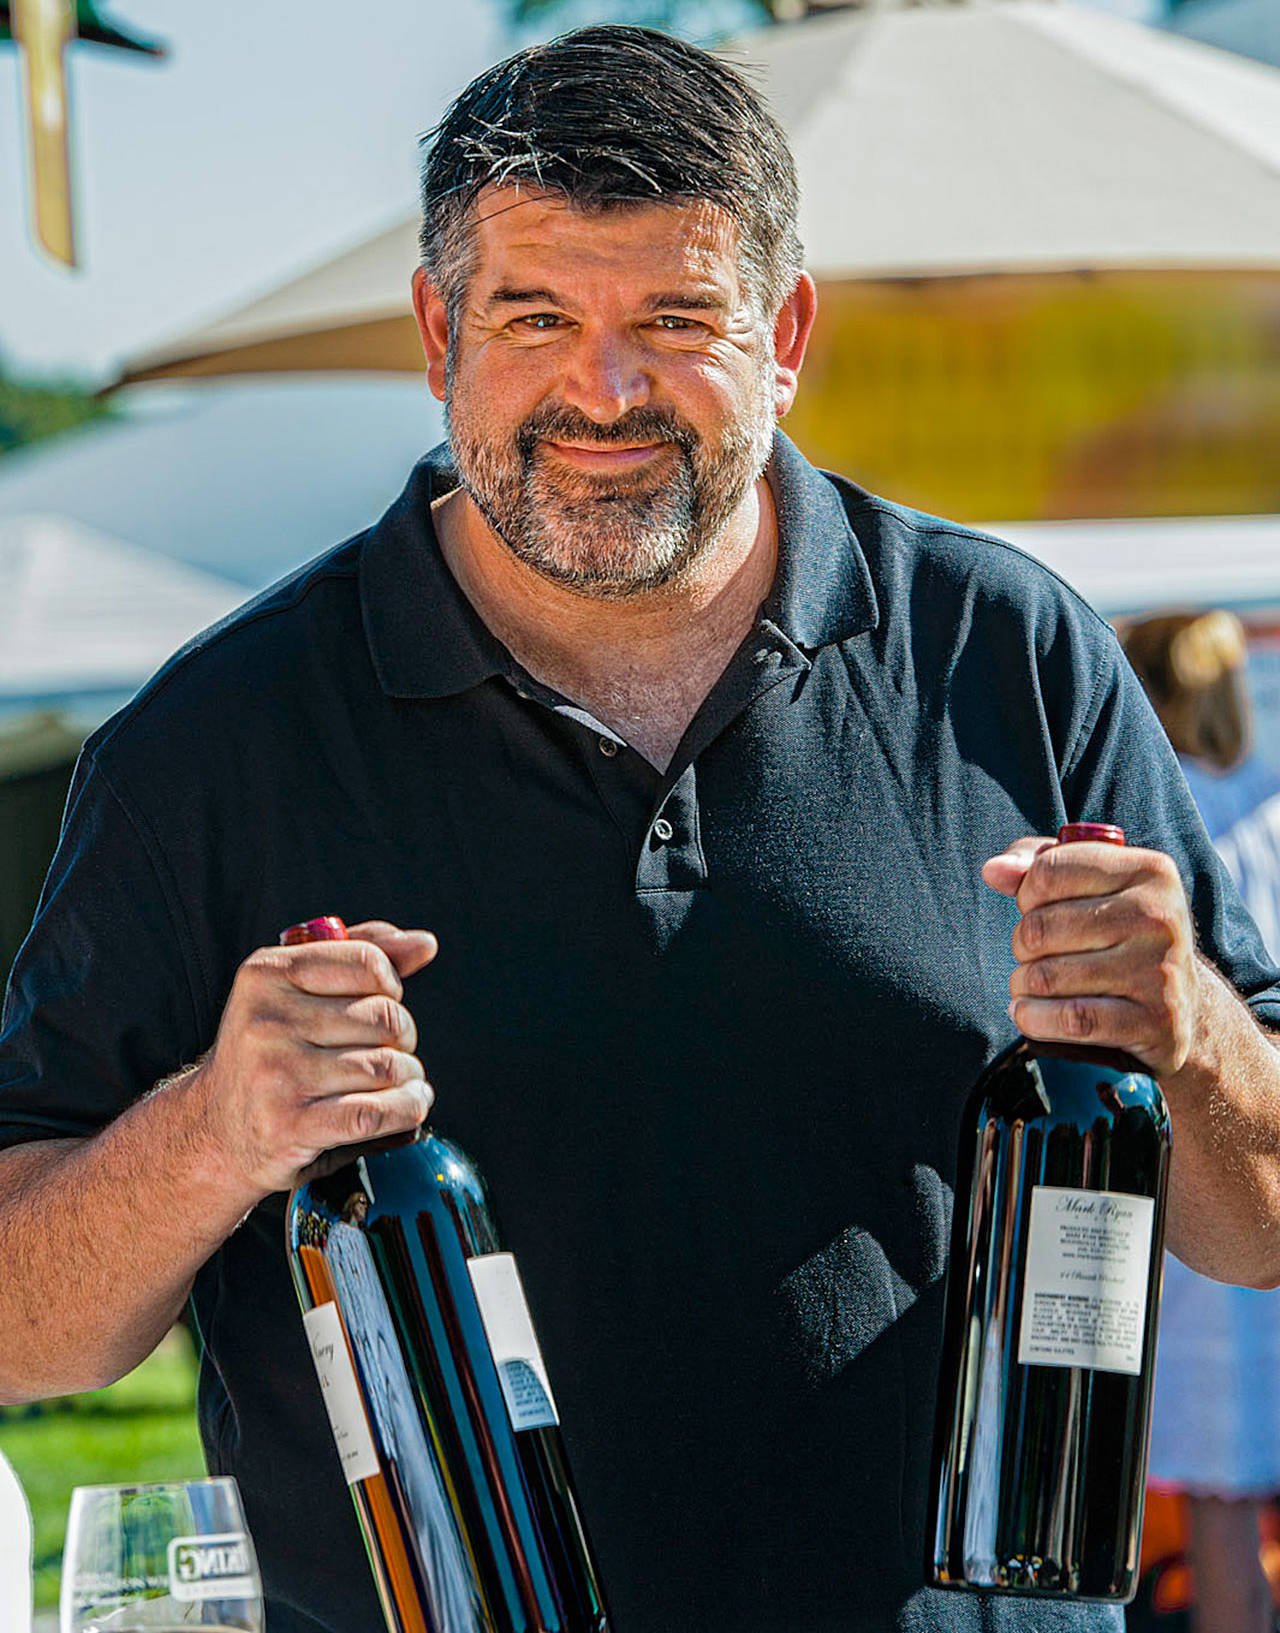 Mark Ryan McNeilly offers his award-winning Washington wines in Woodinville and Walla Walla tasting rooms. (Richard Duval Images)